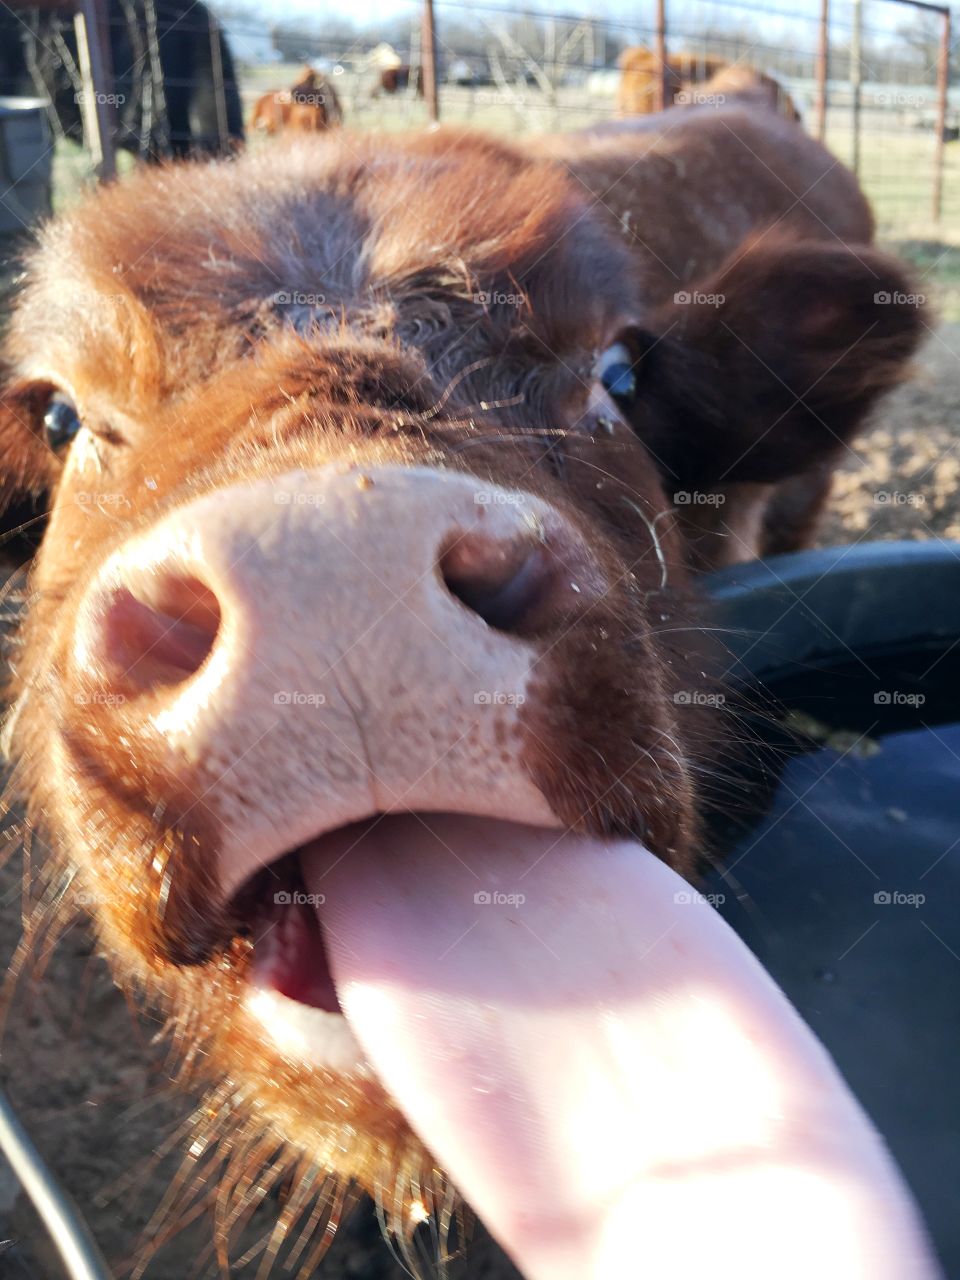 Nosey calf tries to lick the camera. 